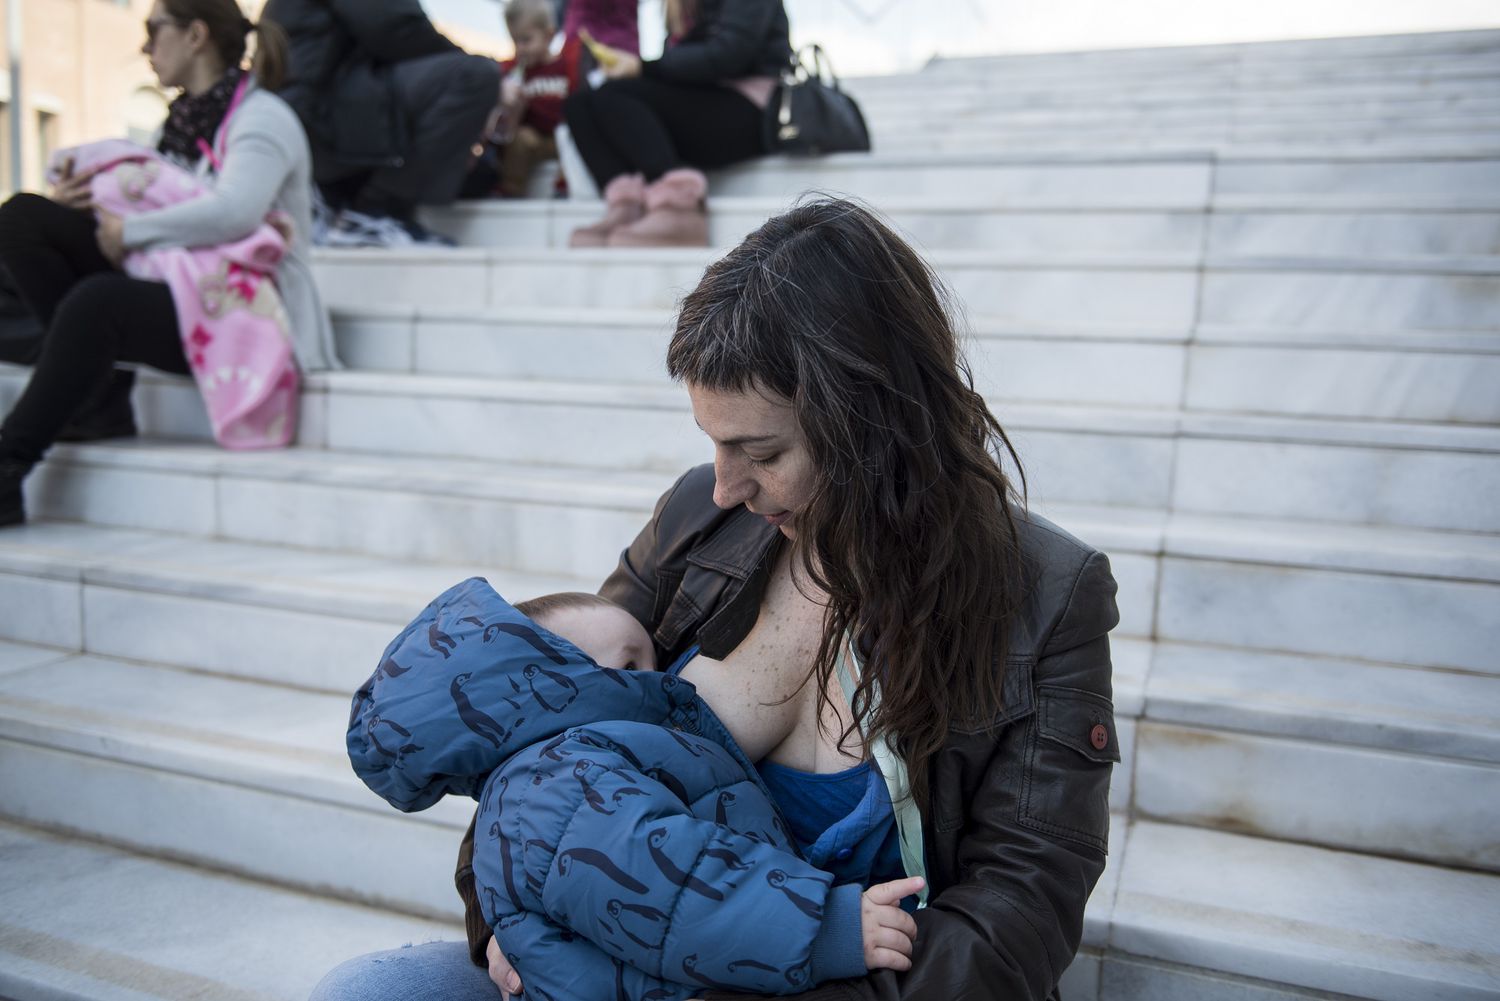 Mother Breastfeeding Baby in Public on Stairs